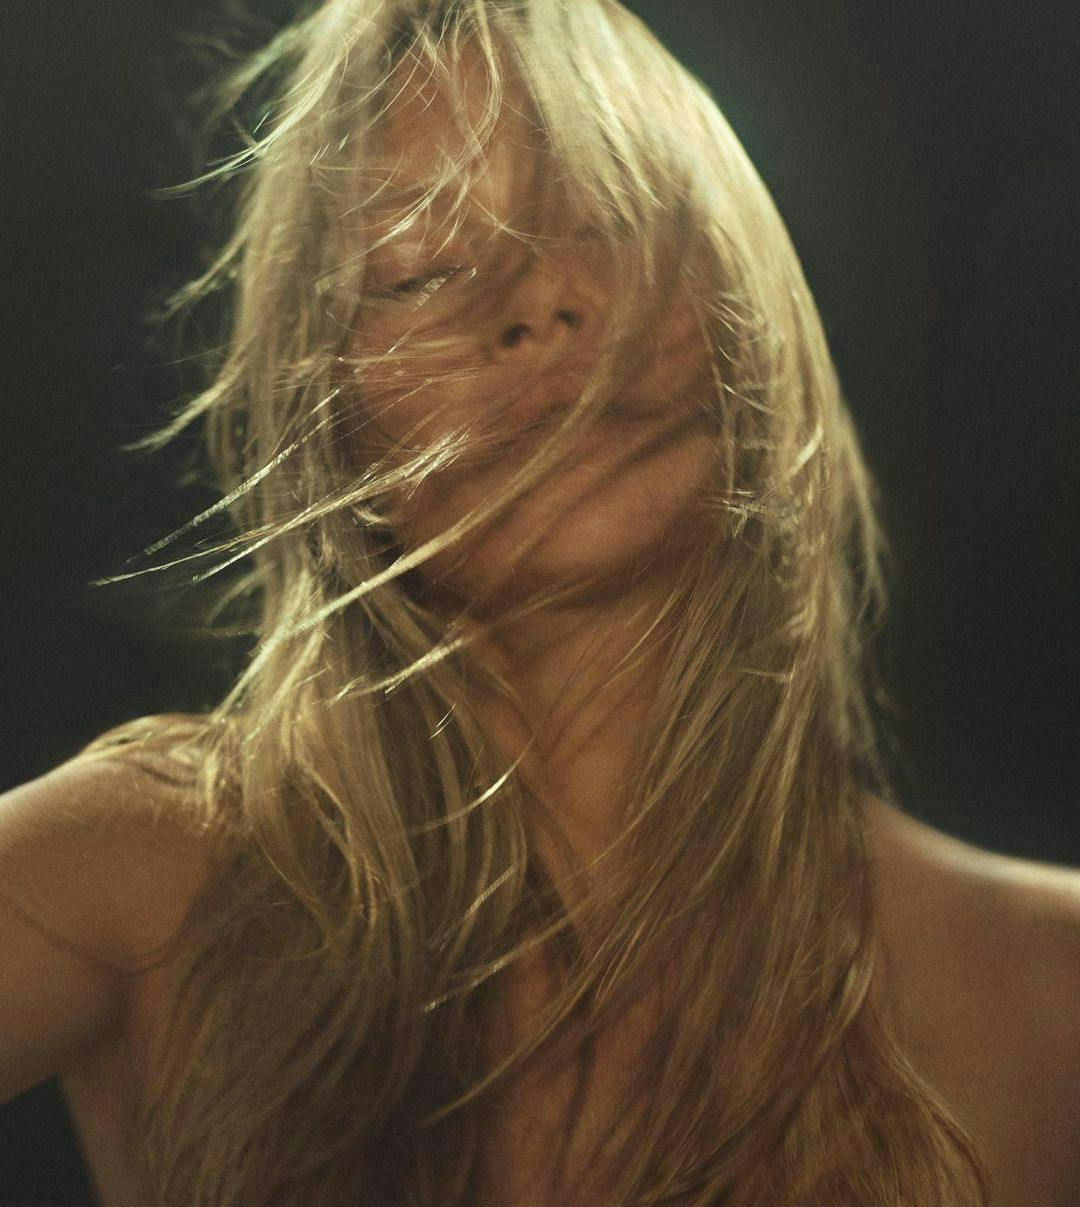 Kate Moss with wind-blown hair.